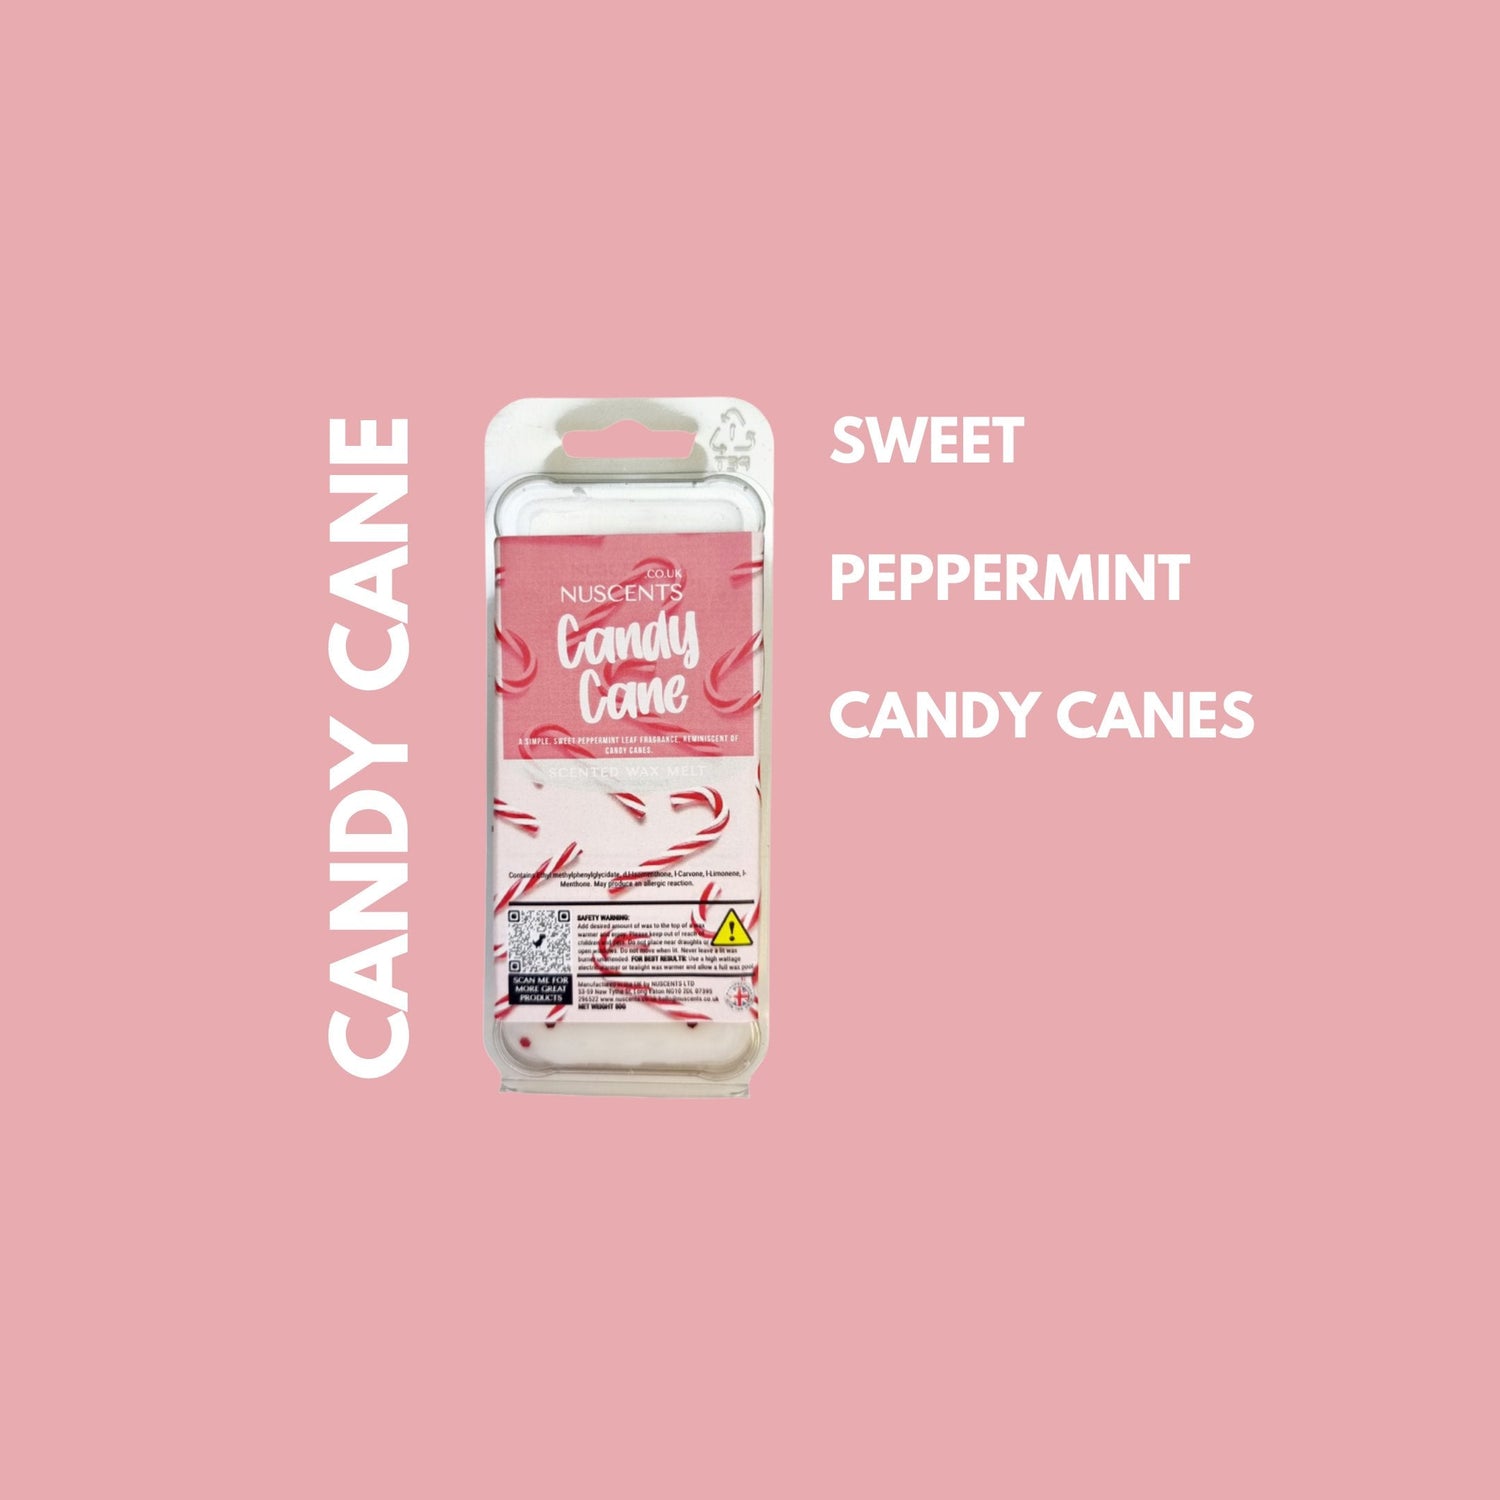 Candy Cane Wax Melt Scent Notes